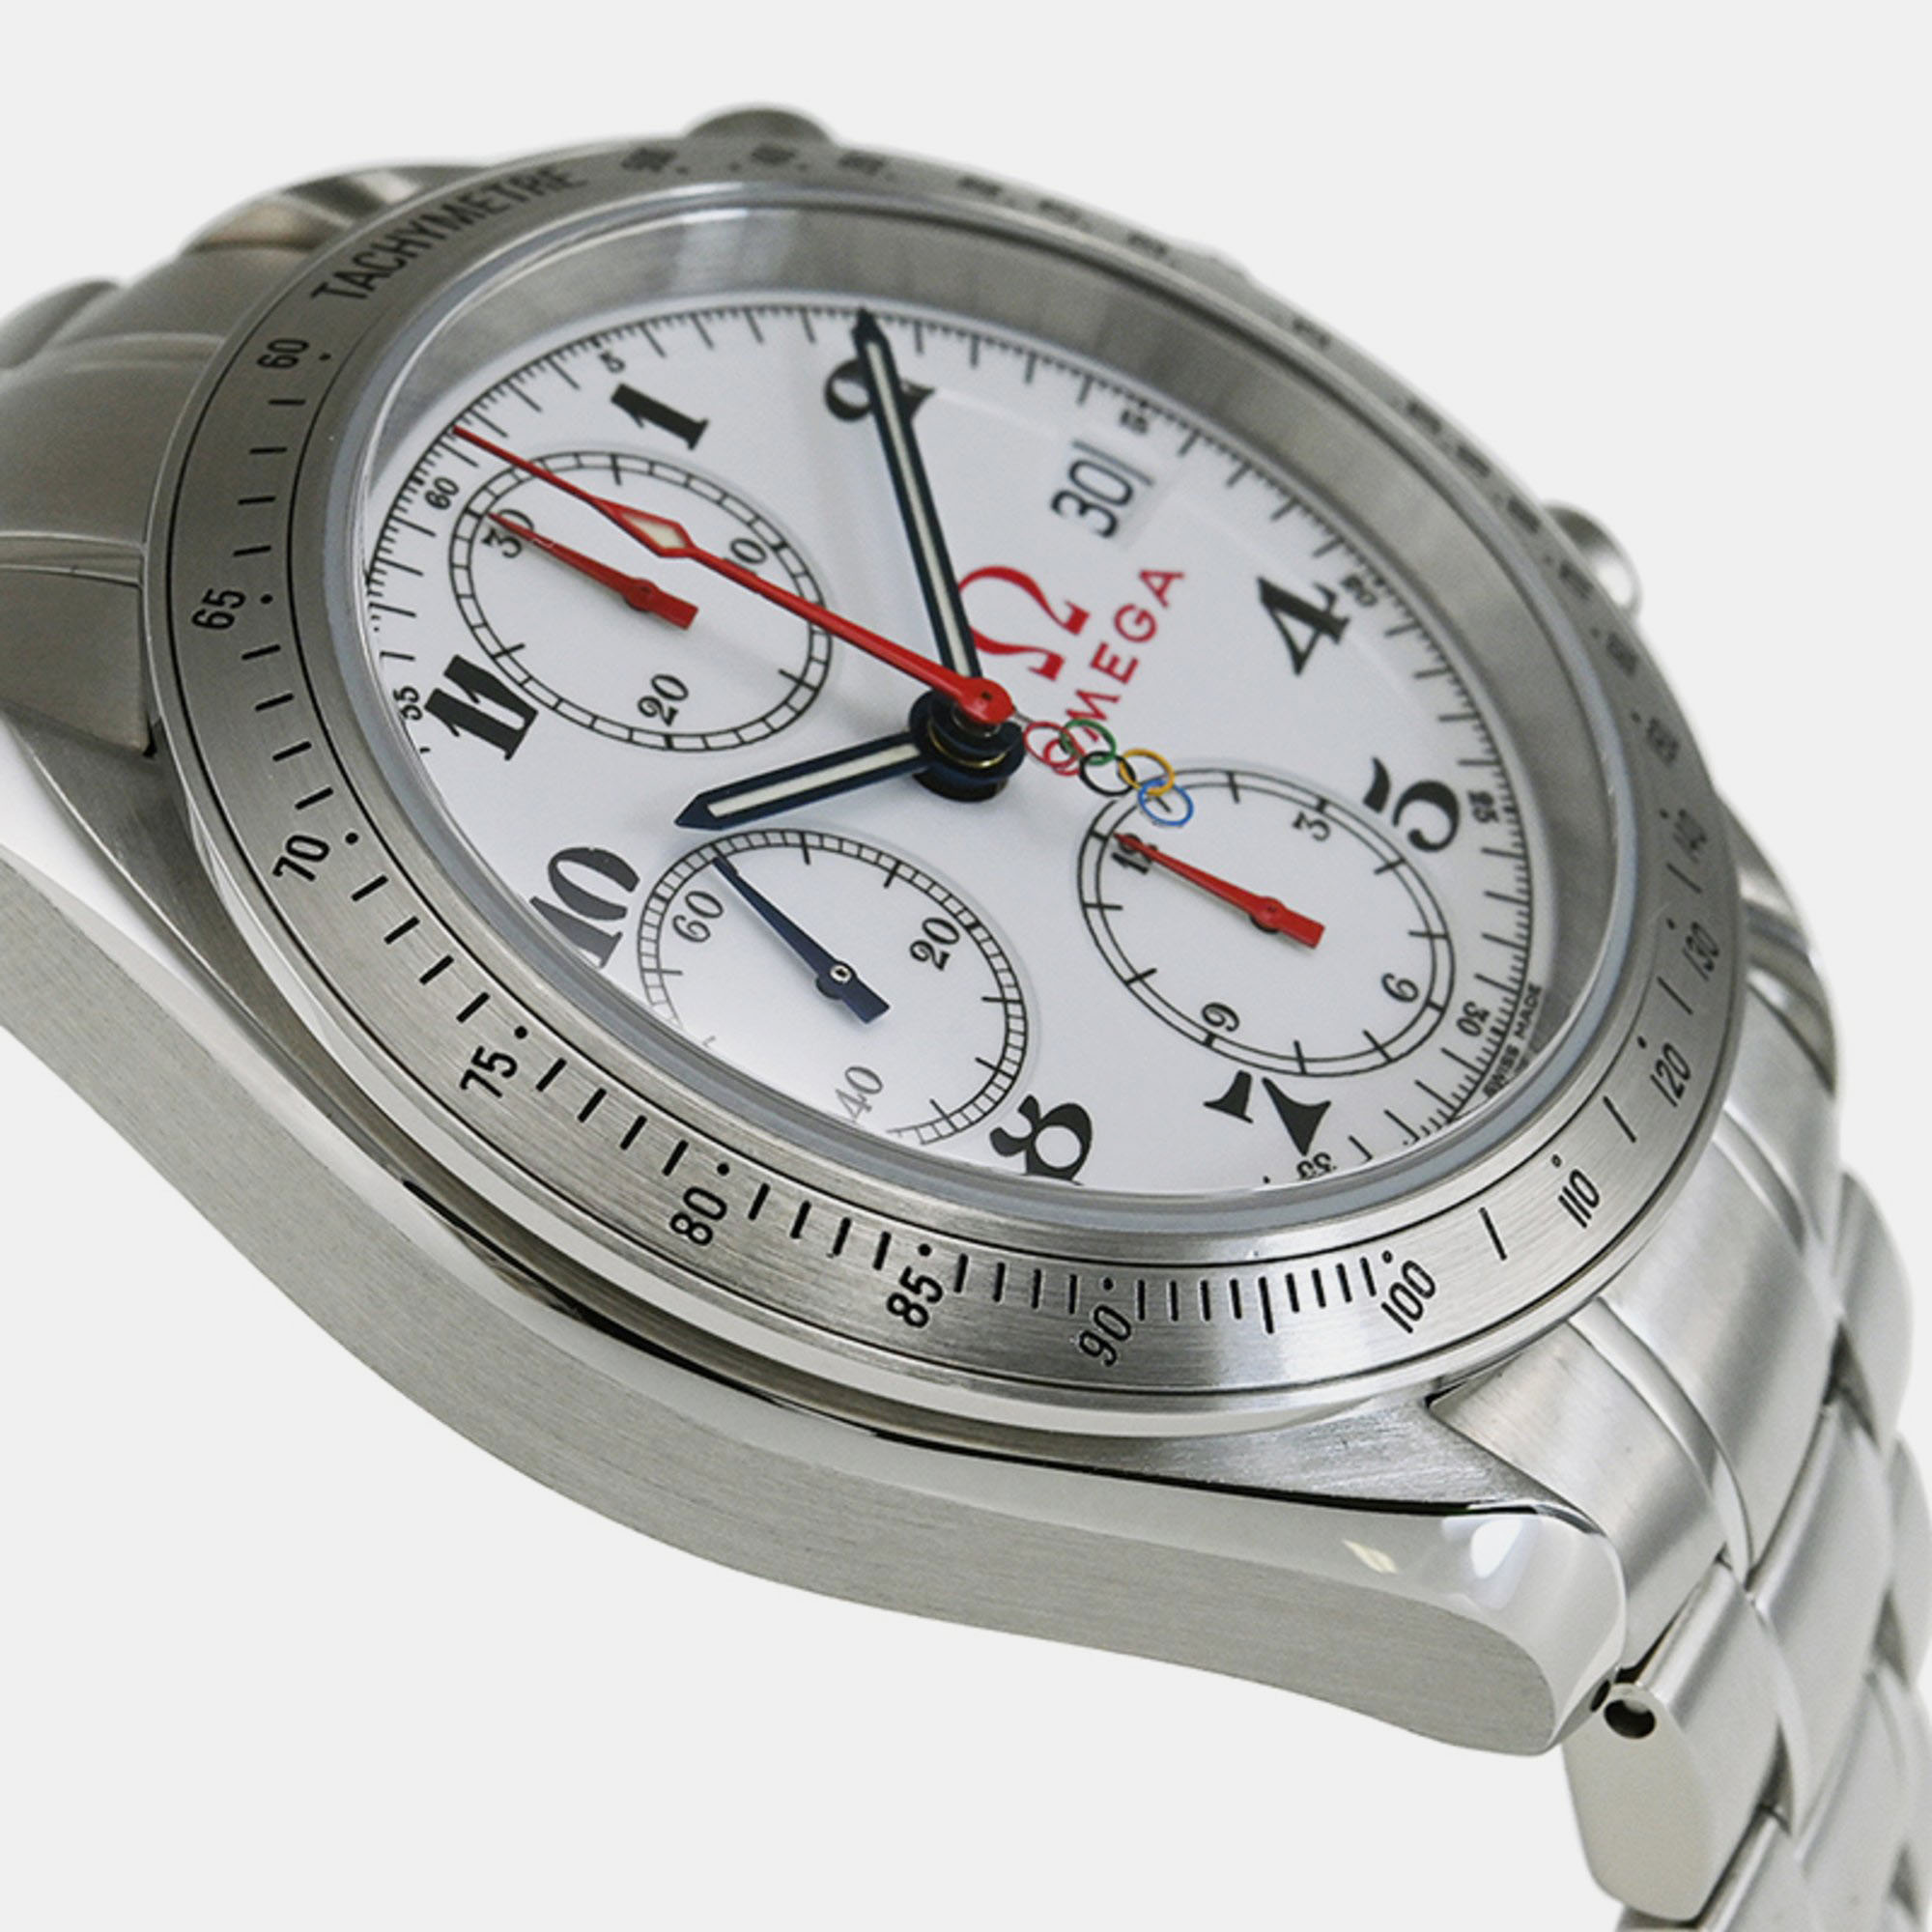 Omega White Stainless Steel Speedmaster 323.10.40.40.04.001 Automatic Men's Wristwatch 40 Mm